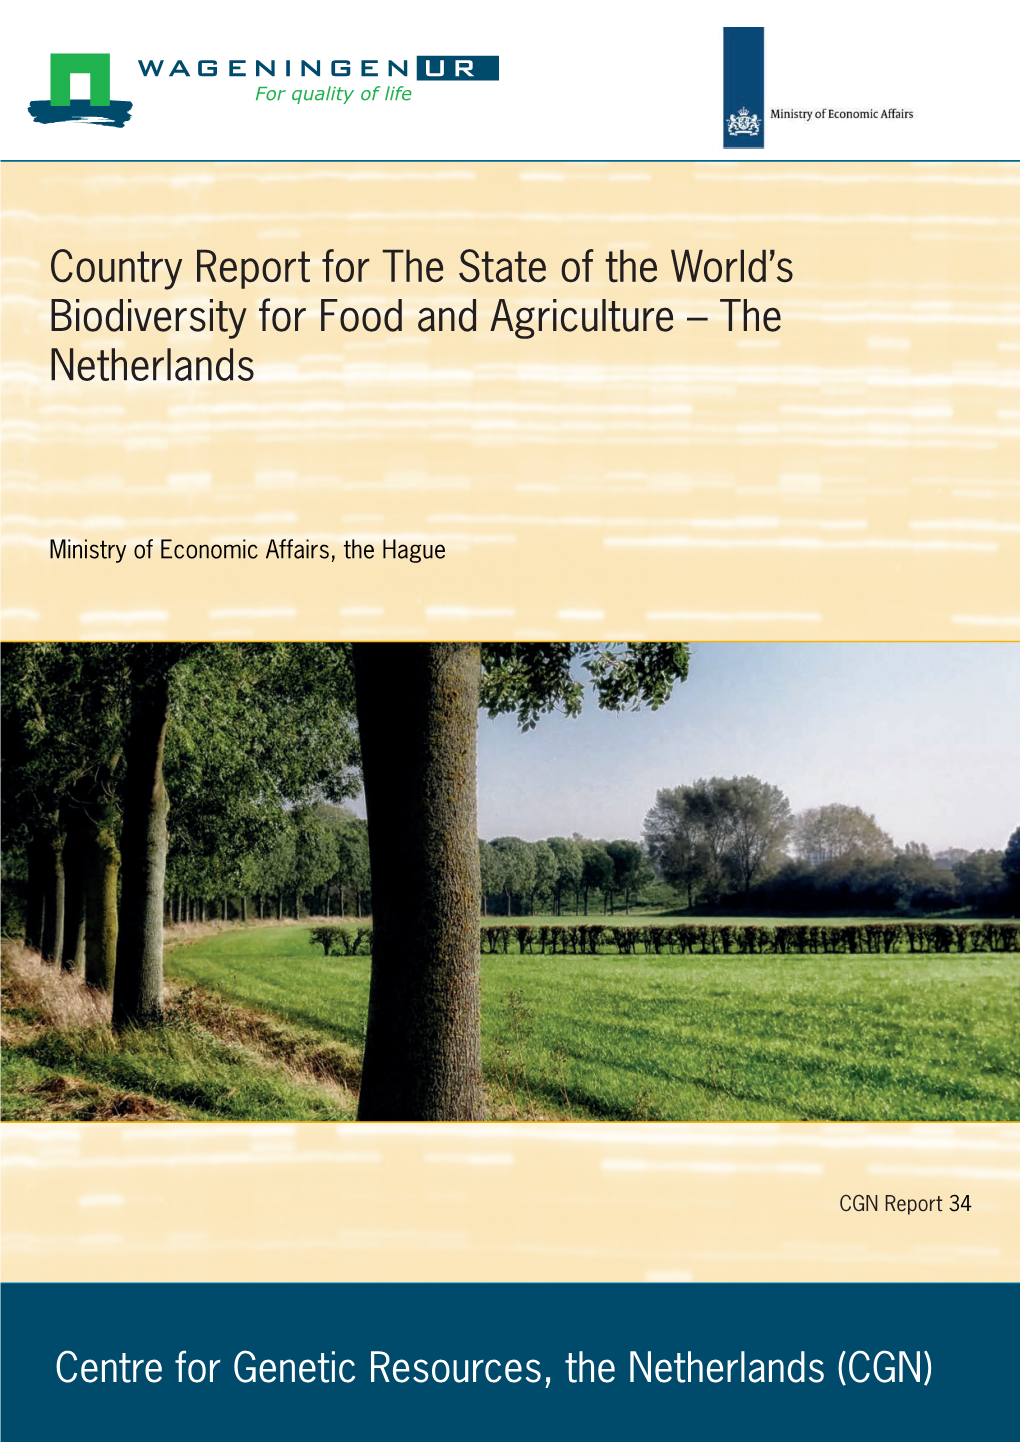 Country Report for the State of the World's Biodiversity for Food and Agriculture